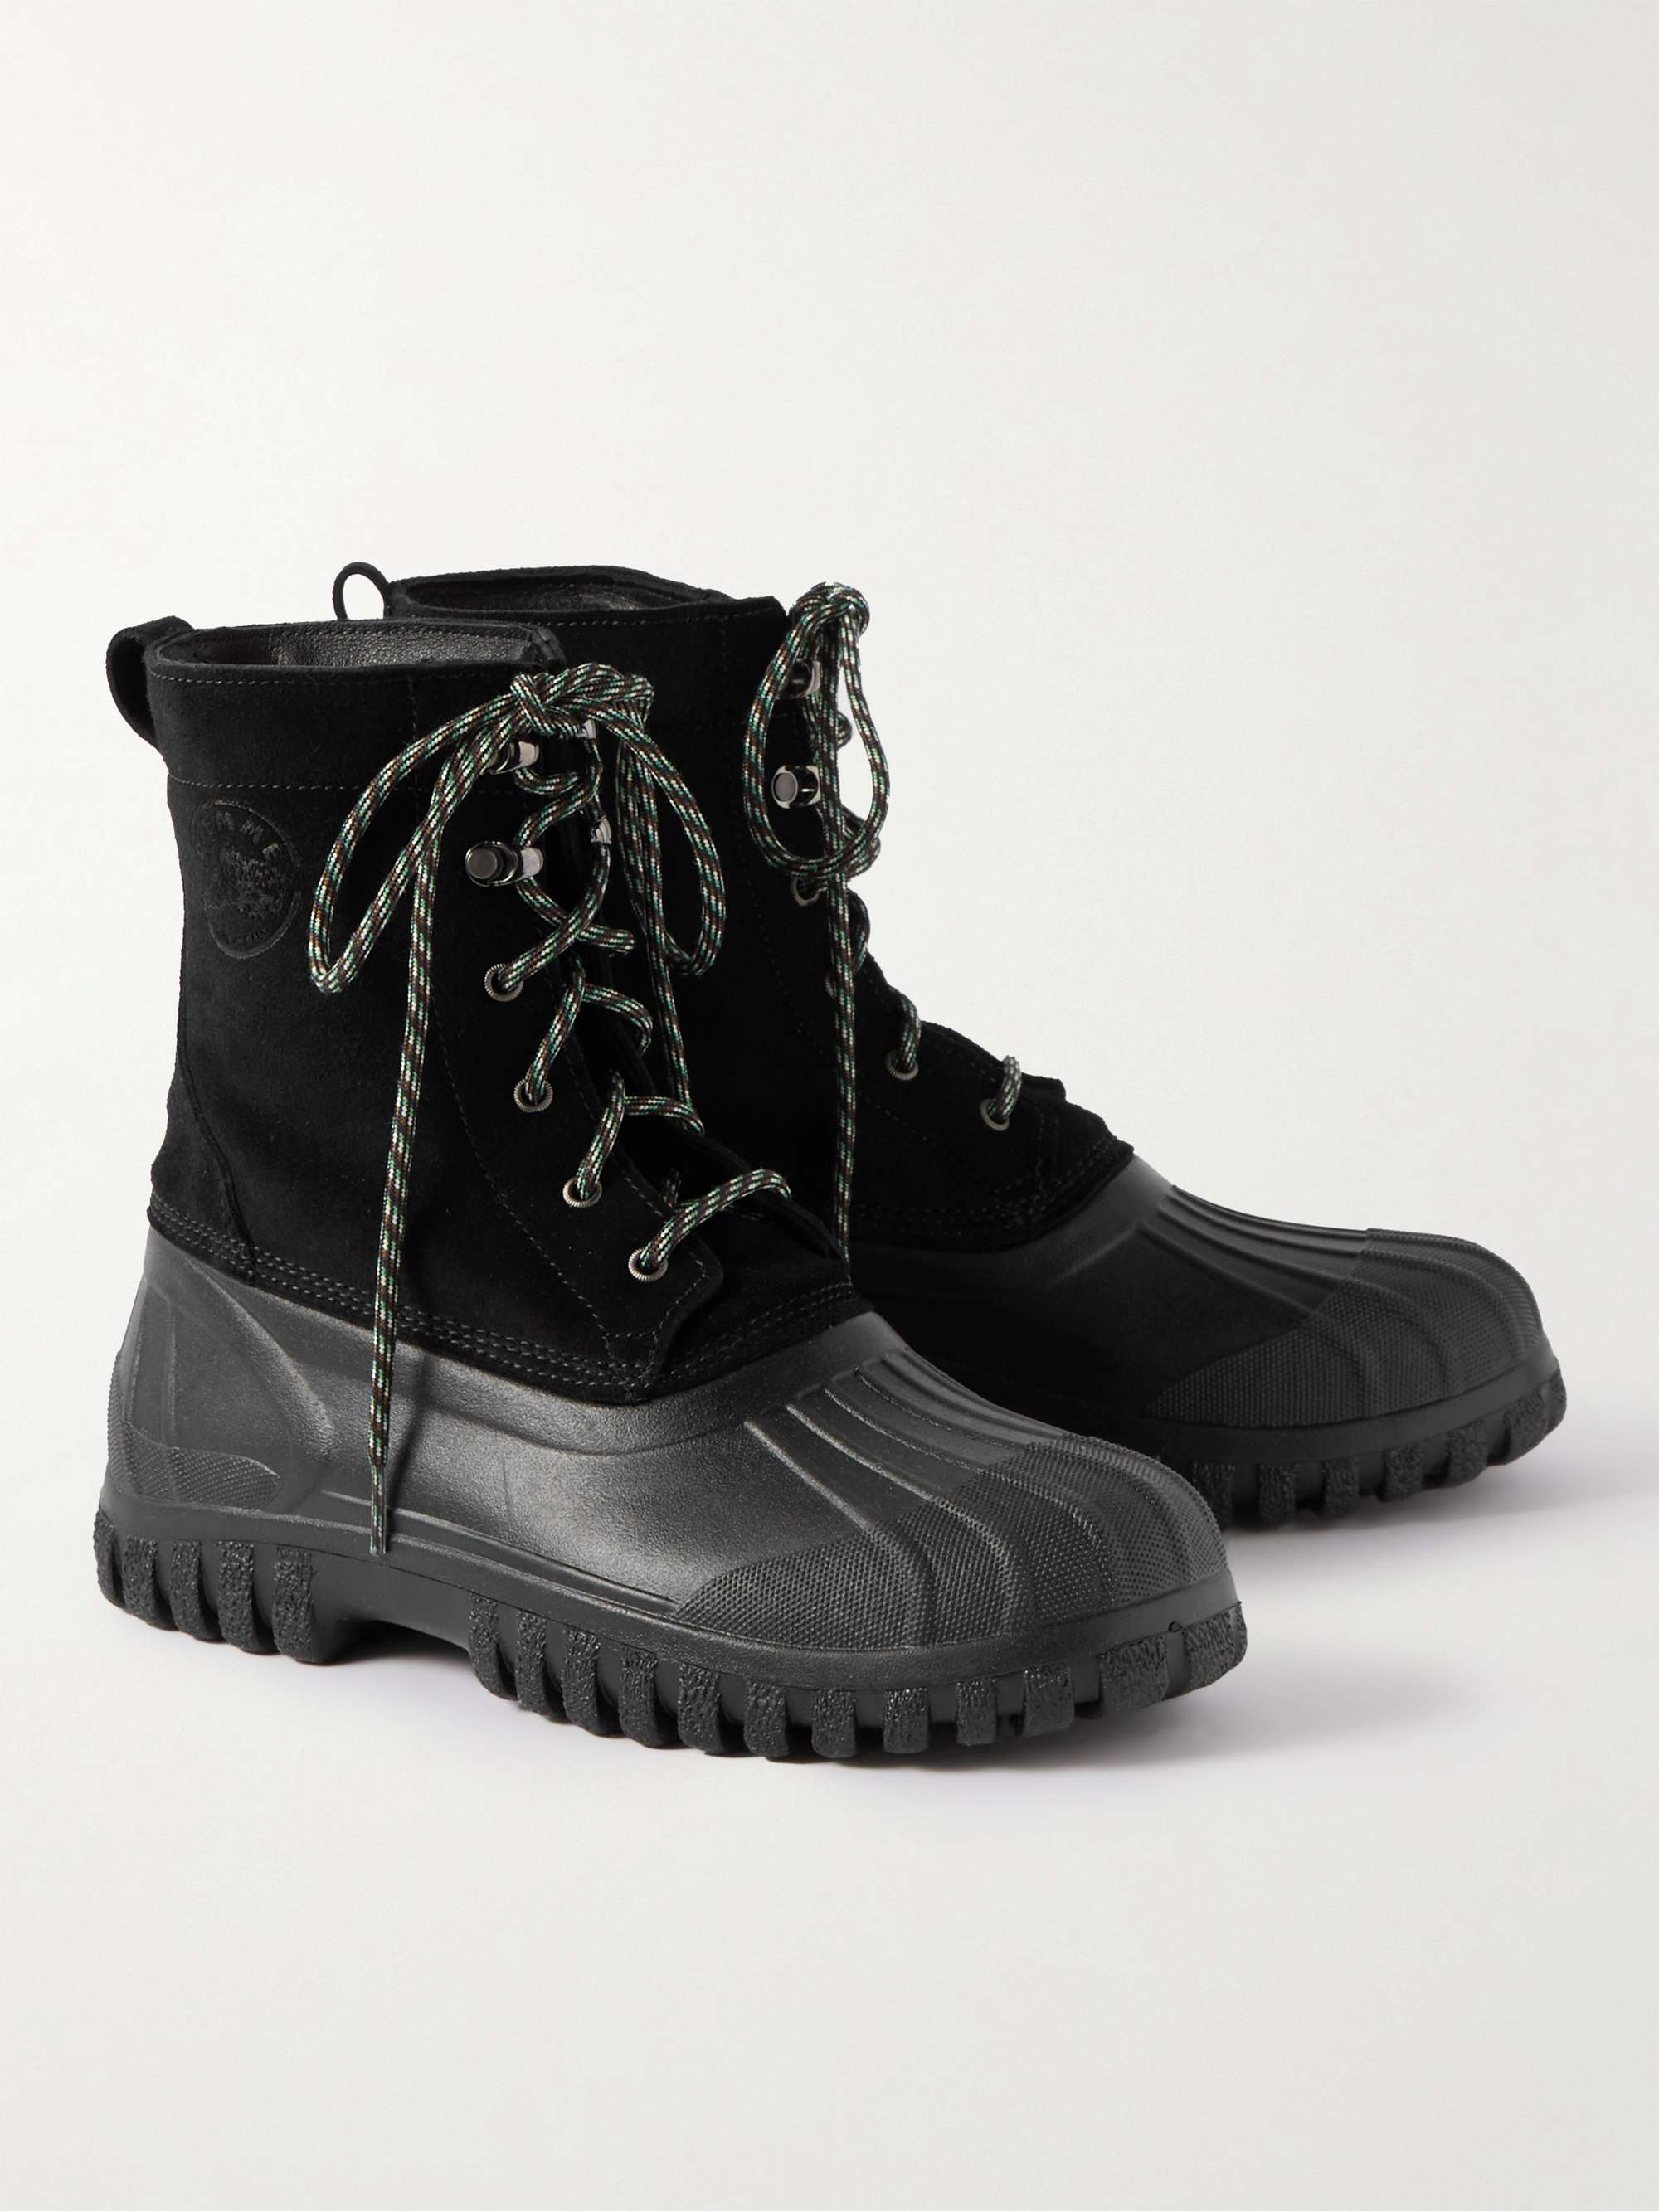 Black Anatra Suede and Rubber Boots | DIEMME | MR PORTER